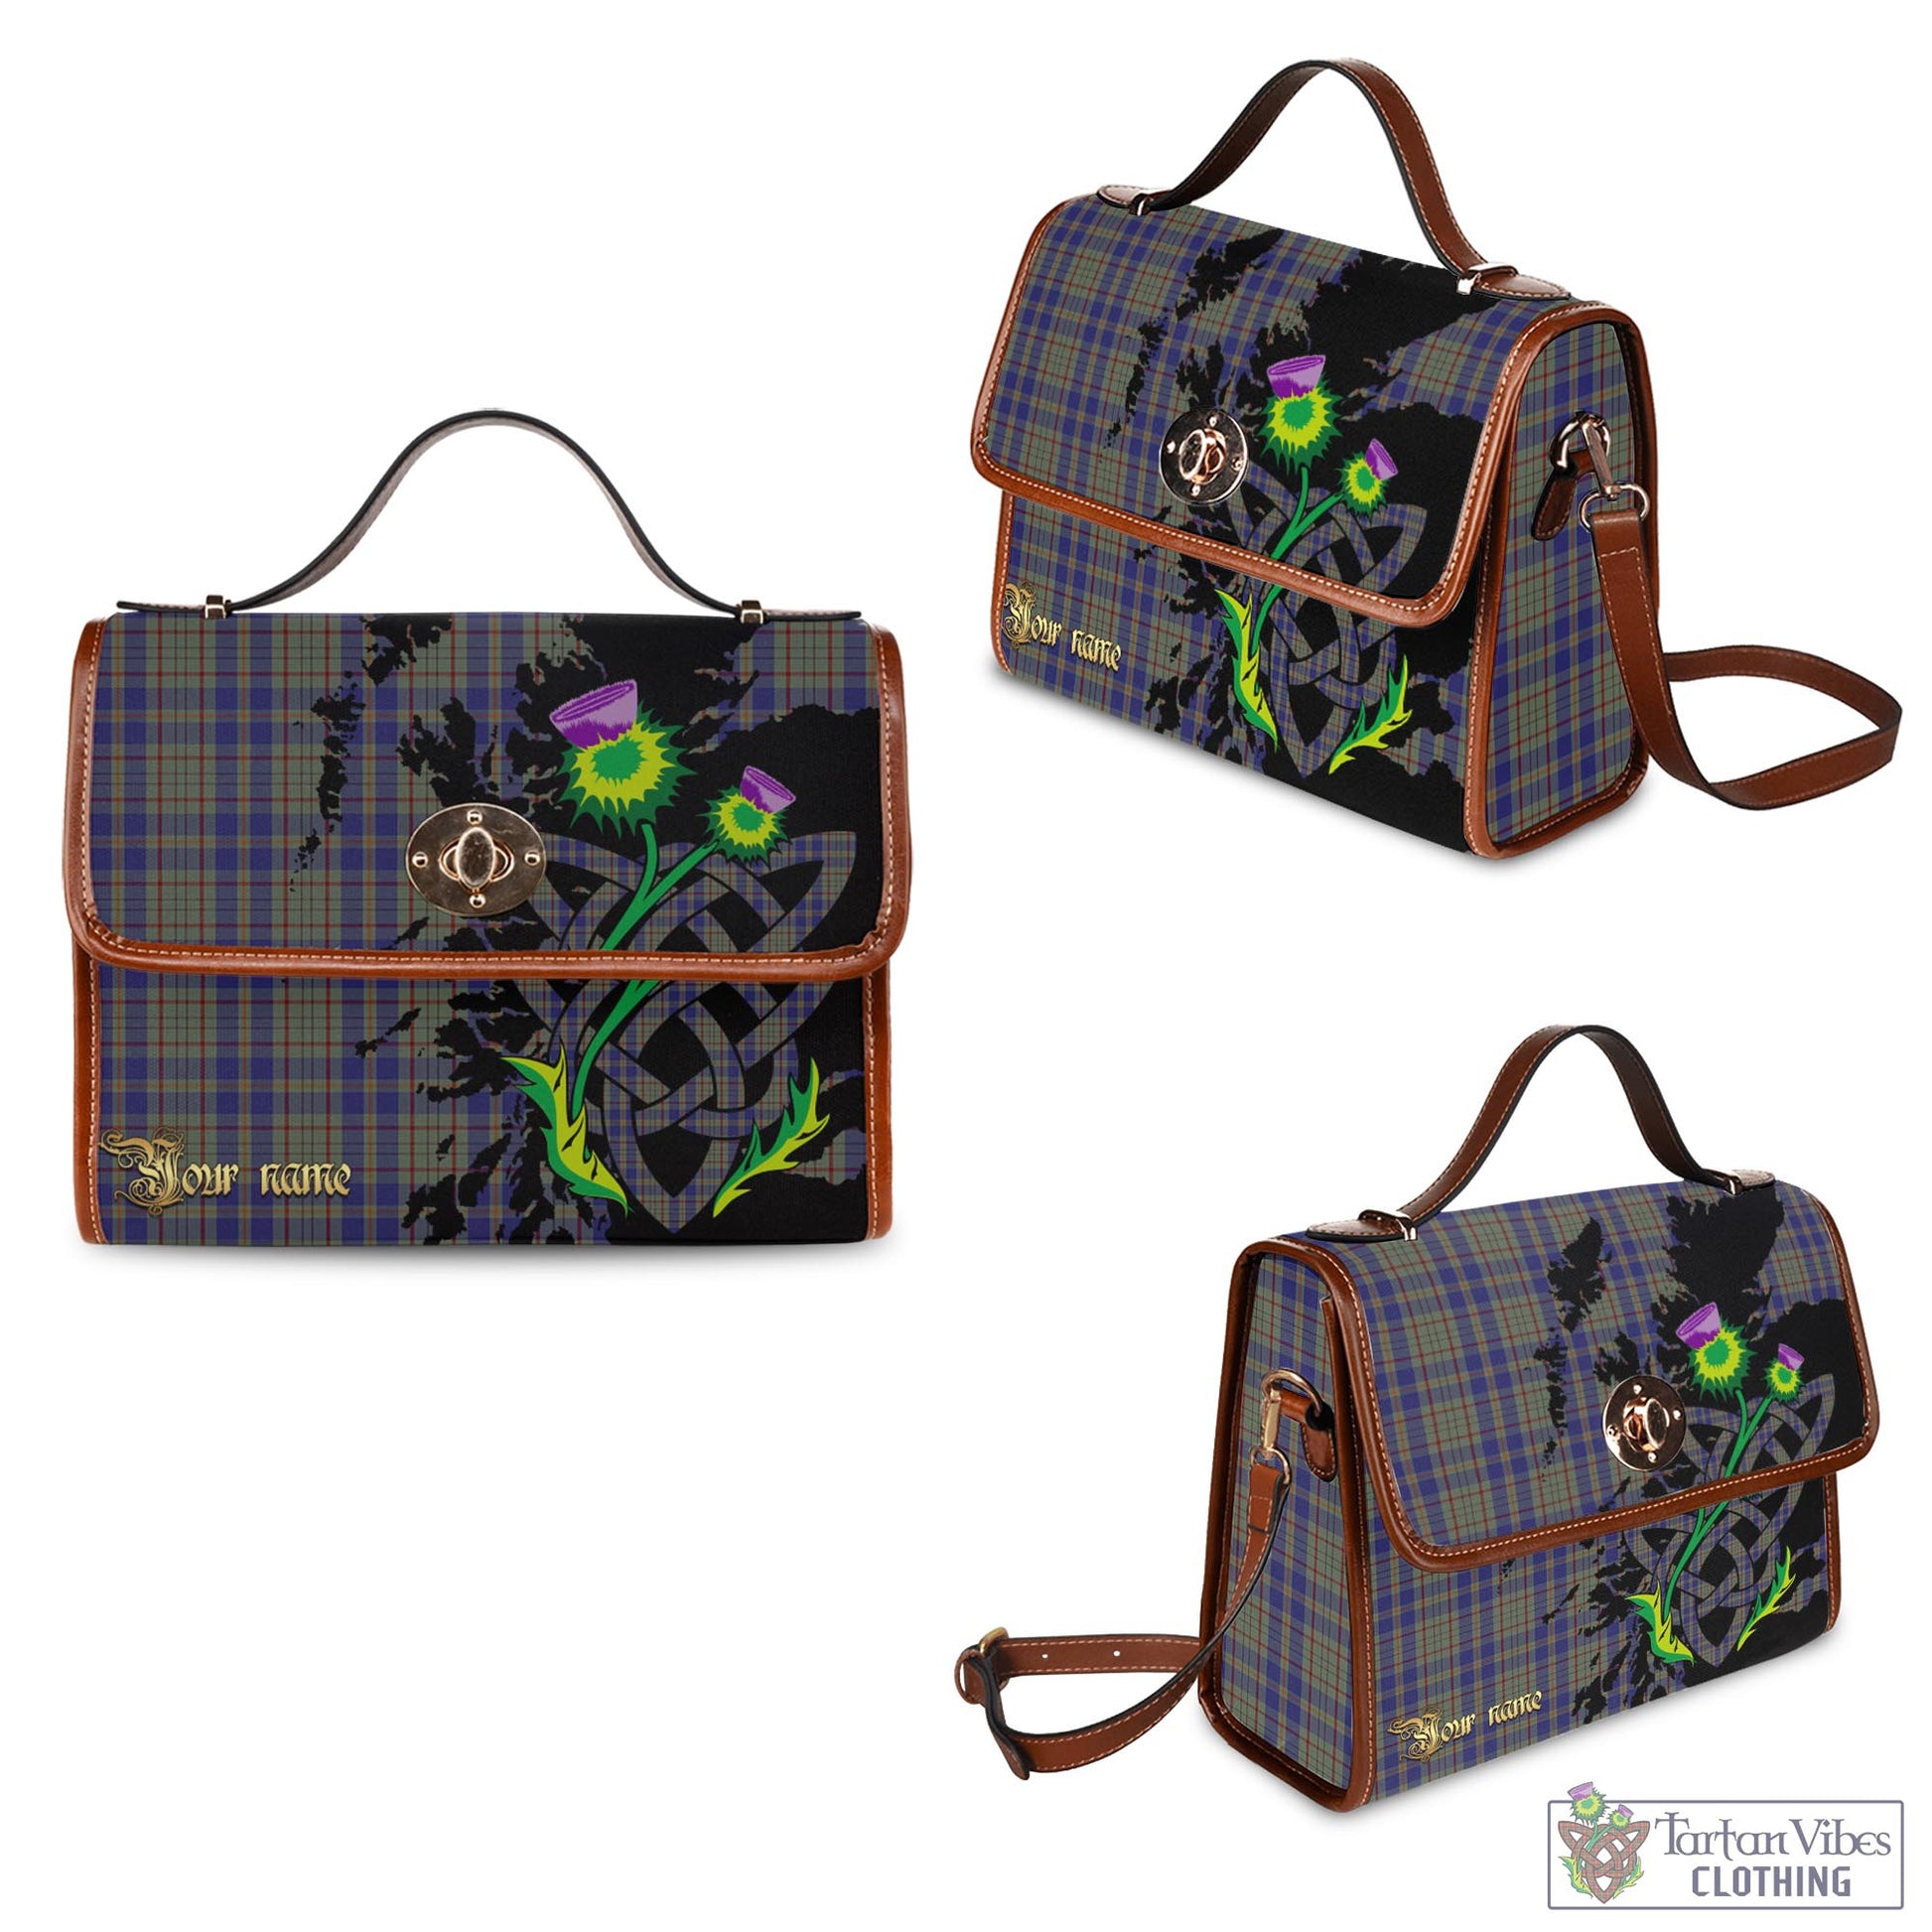 Tartan Vibes Clothing Kildare County Ireland Tartan Waterproof Canvas Bag with Scotland Map and Thistle Celtic Accents